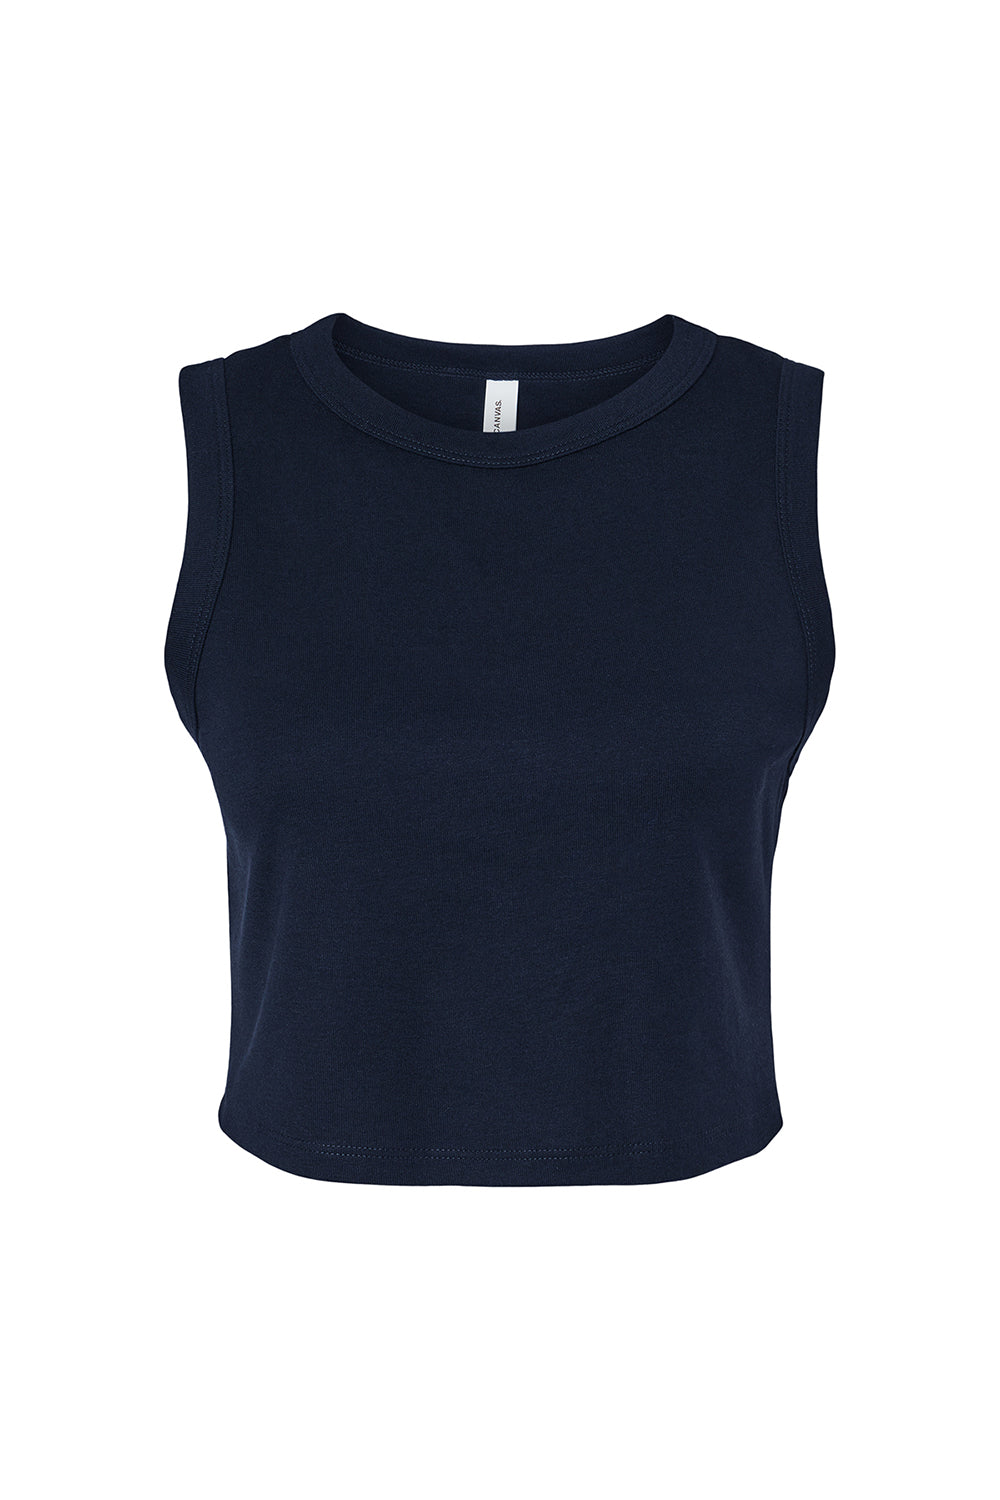 Bella + Canvas 1013BE Womens Micro Ribbed Muscle Crop Tank Top Navy Blue Flat Front